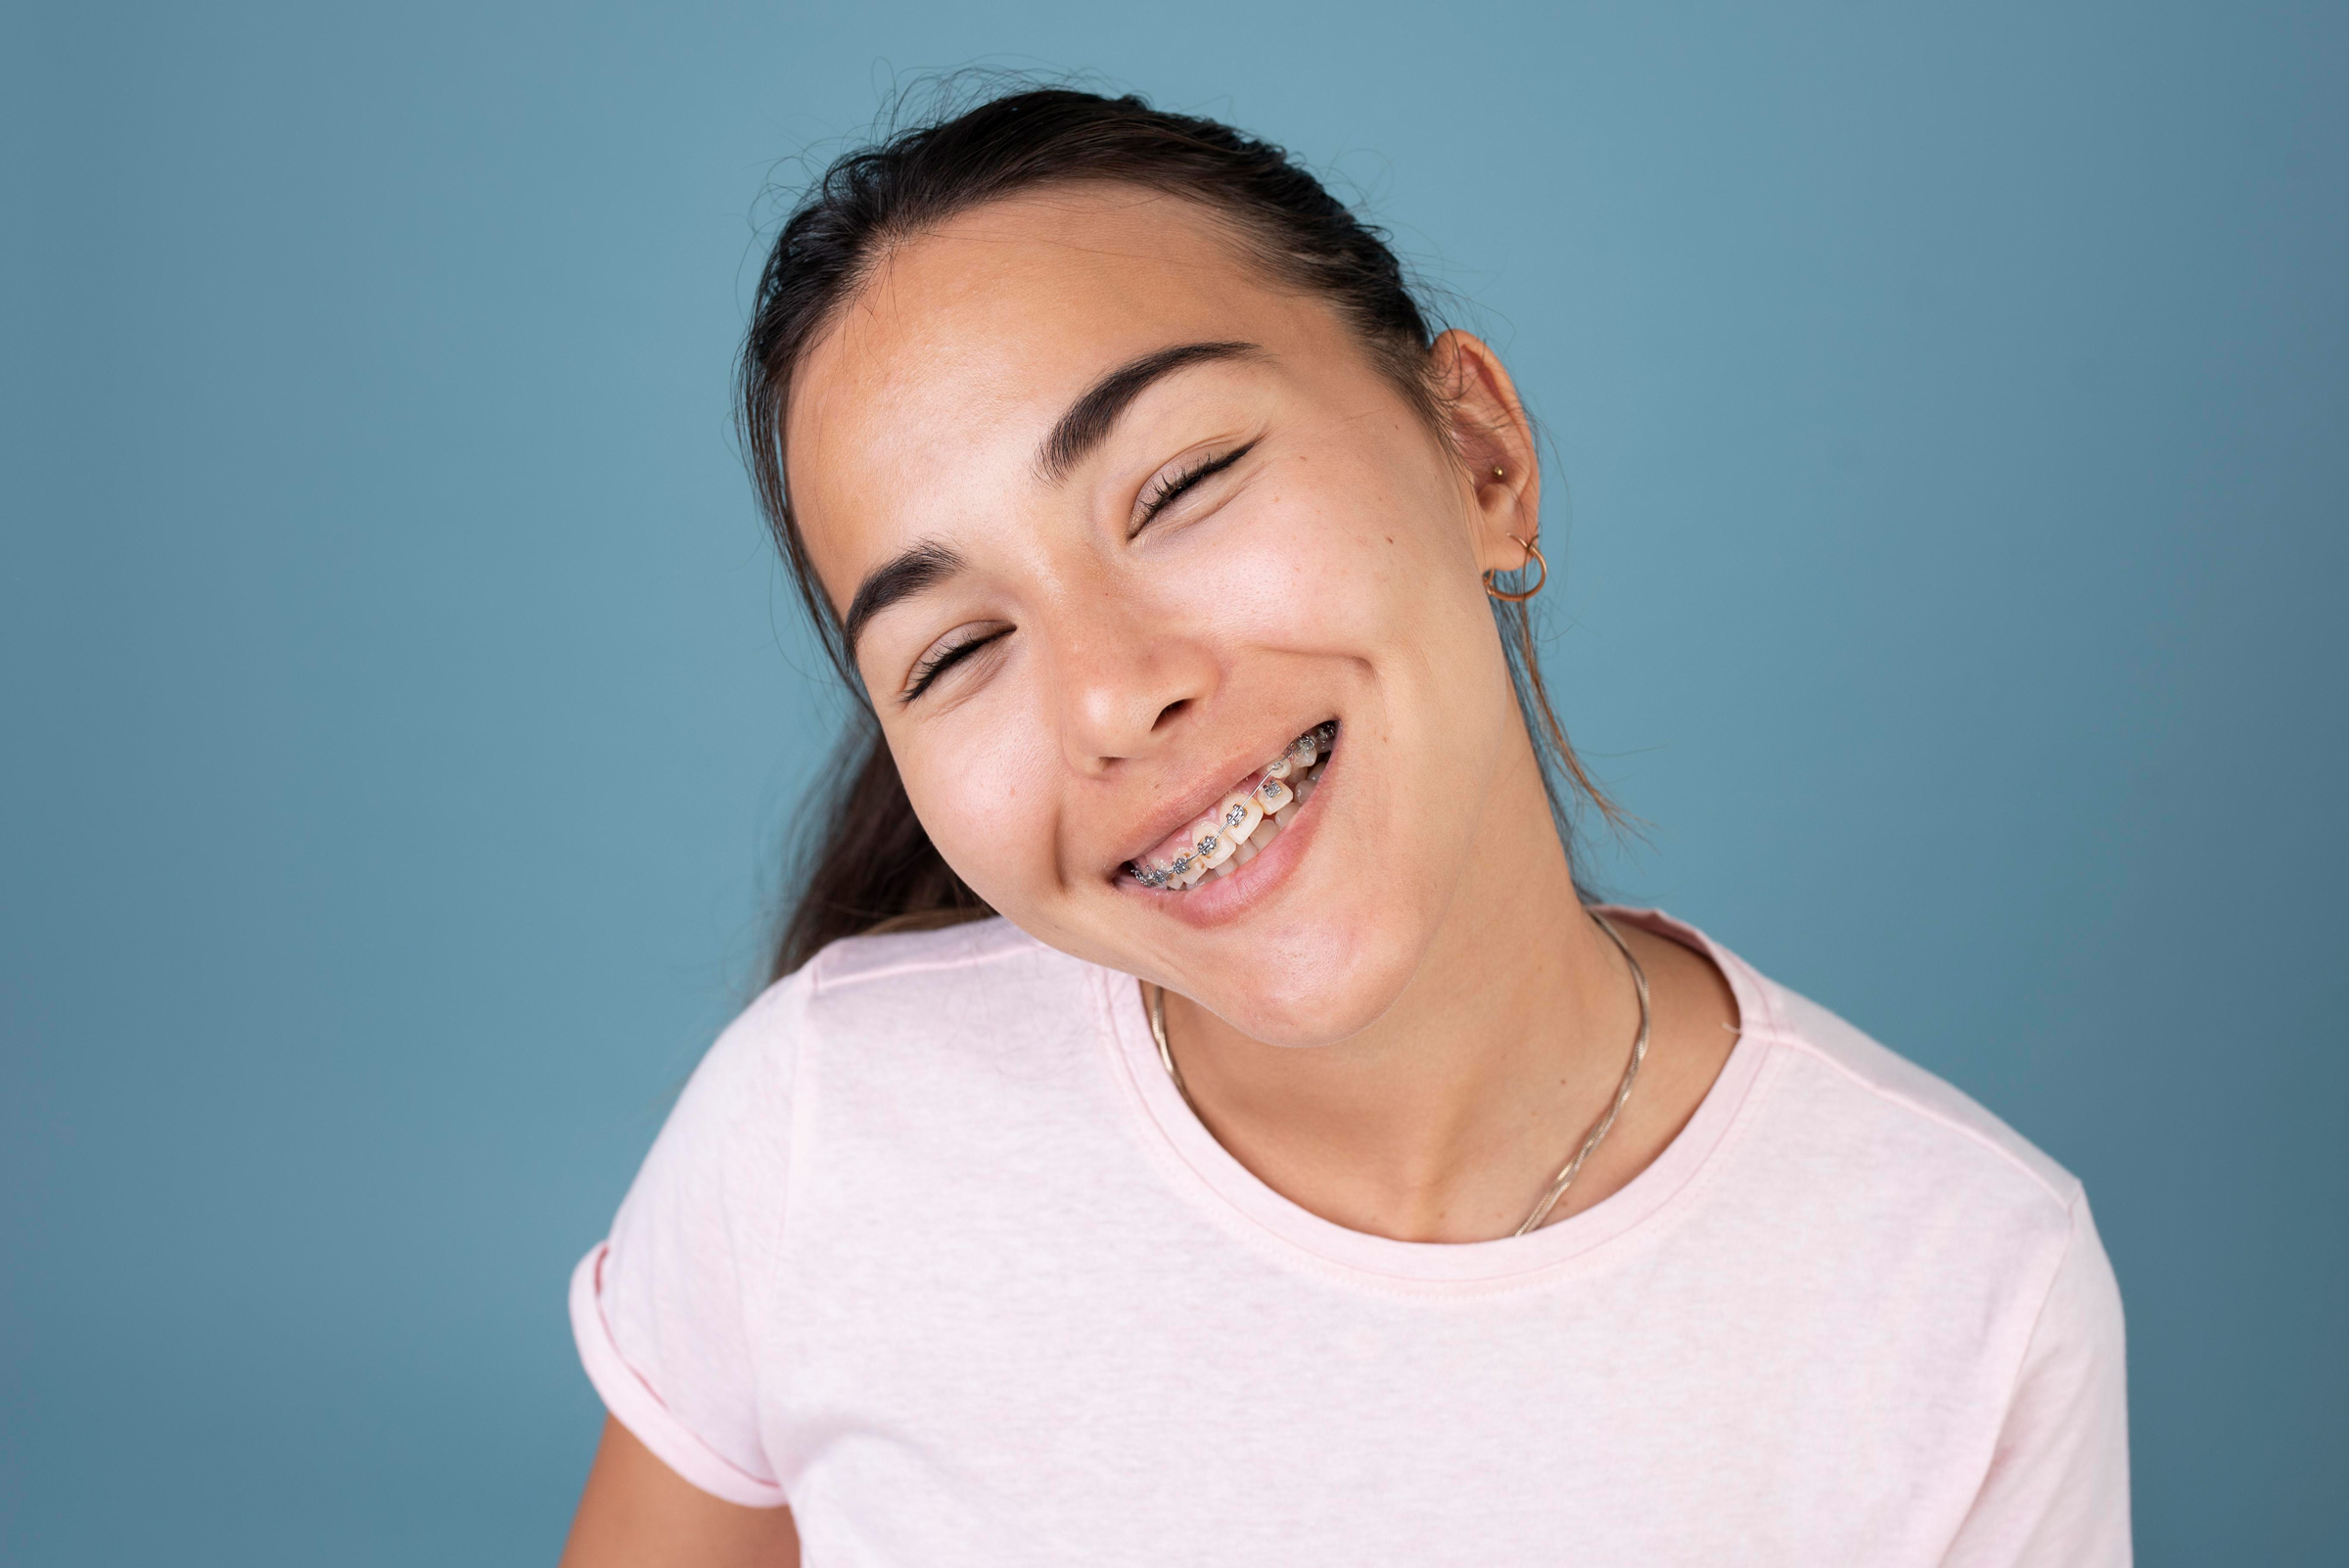 Girl smiling with metal braces for orthodontic treatment